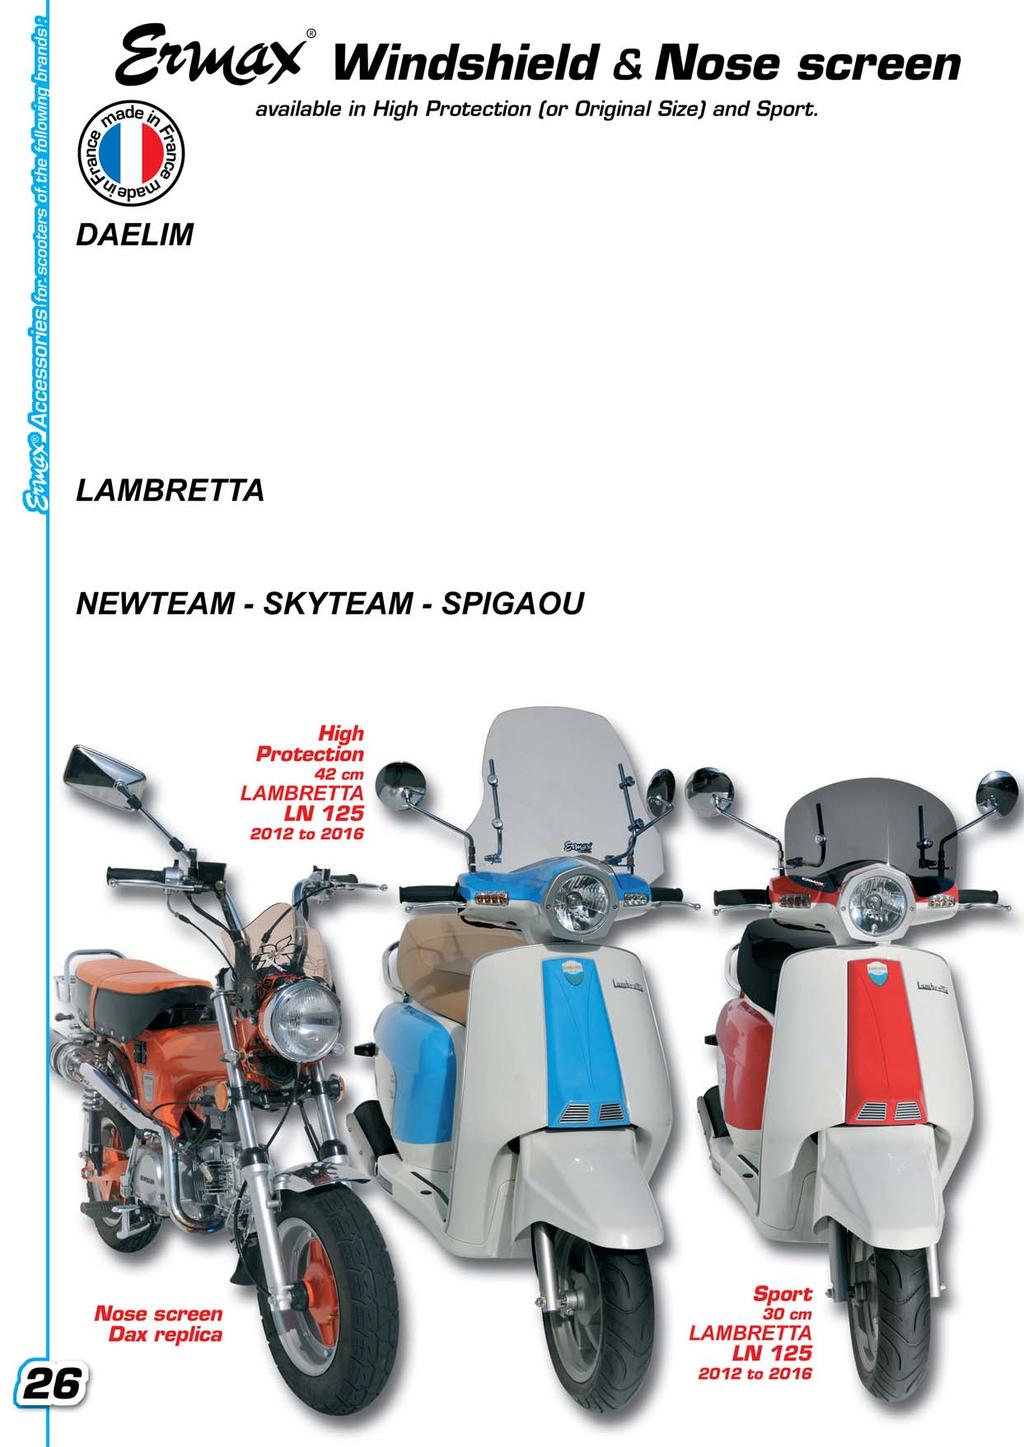 The use of the DAELIM, LAMBRETTA, NEWTEAM, SKYTEAM, SPIGAOU brands andor photos representing DAELIM, LAMBRETTA, NEWTEAM, SKYTEAM, SPIGAOU scooter models is made solely for customers information to